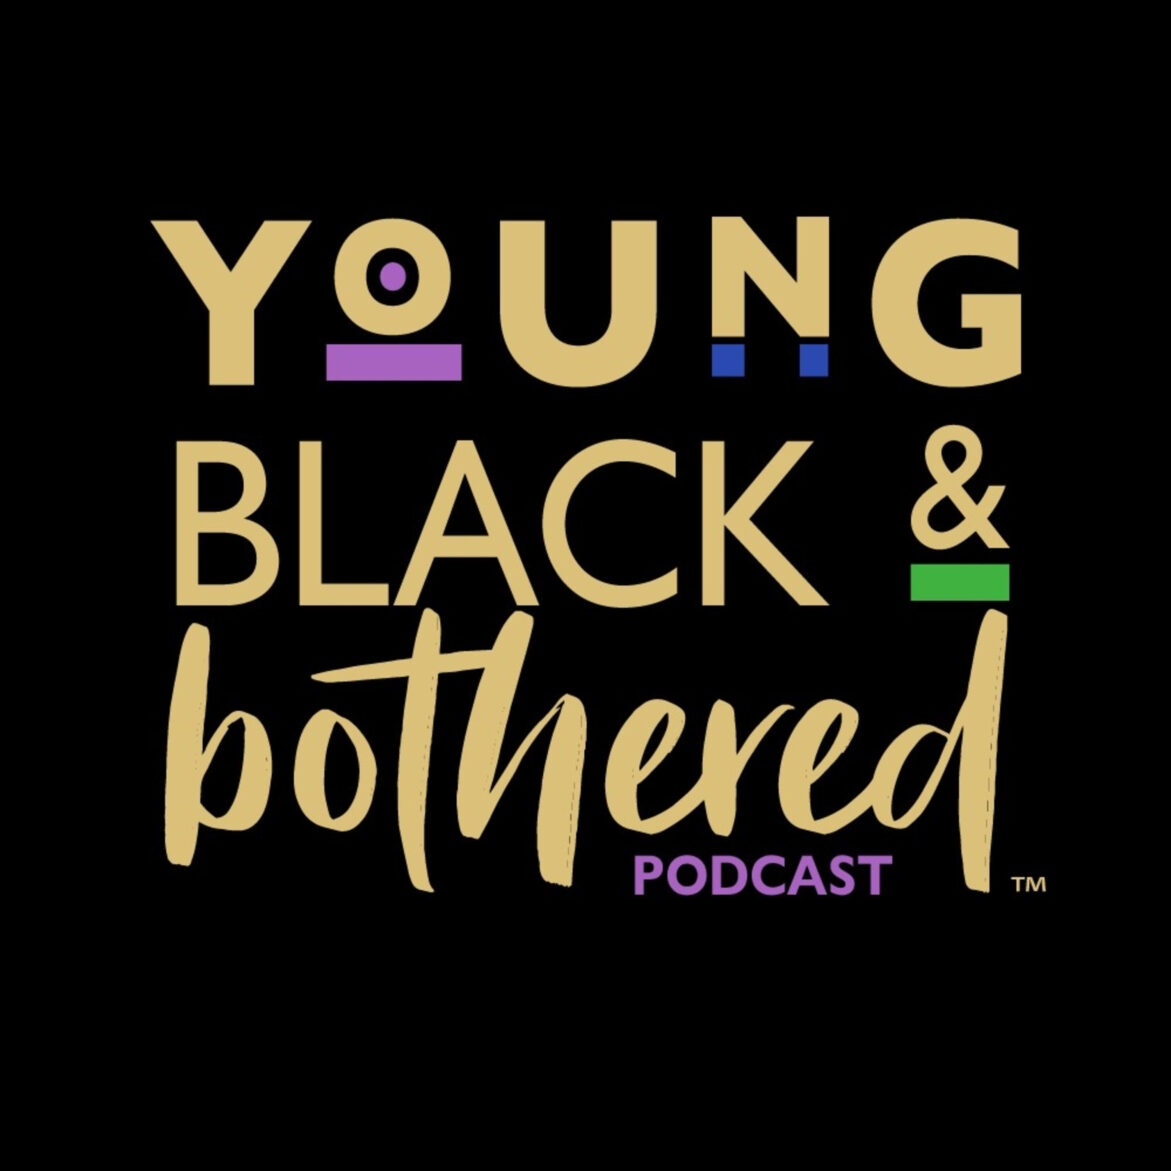 Black Podcasting - 91: Check Your Own